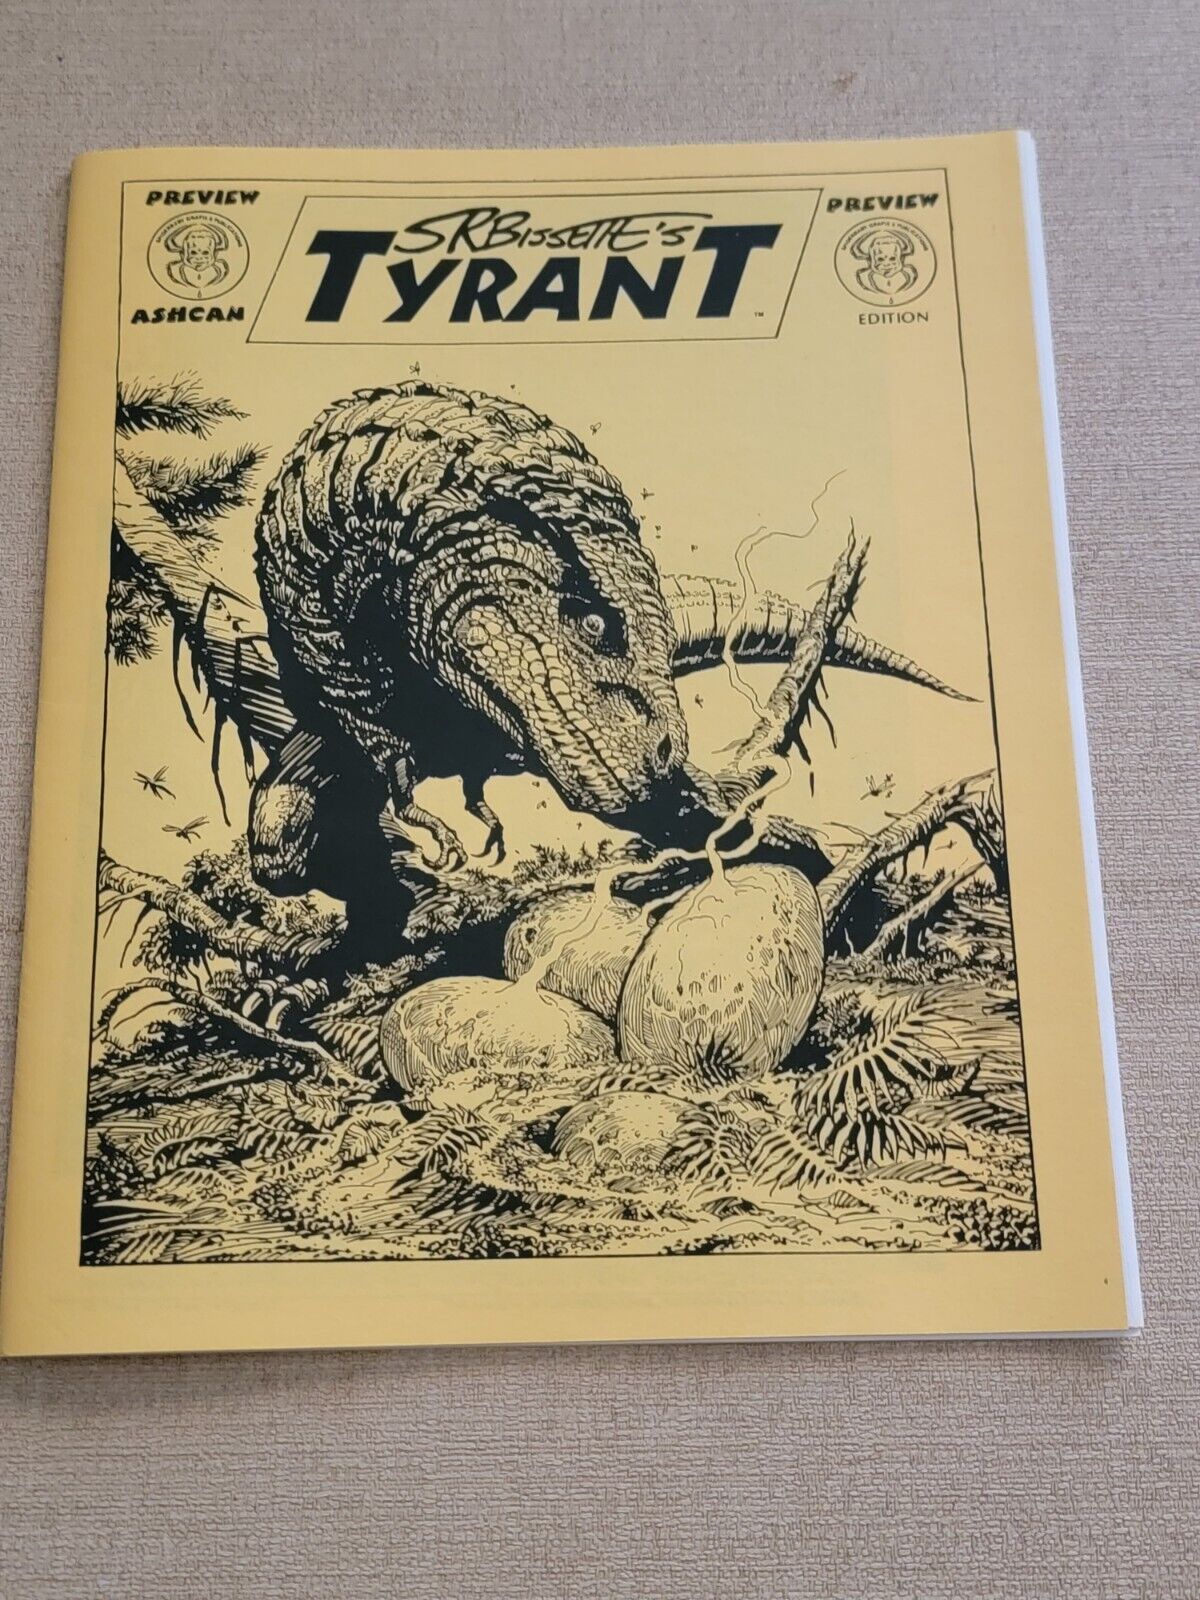 S R Bissette's Tyrant Preview Edition Ashcan Comic Spiderbaby Graffix Pub.